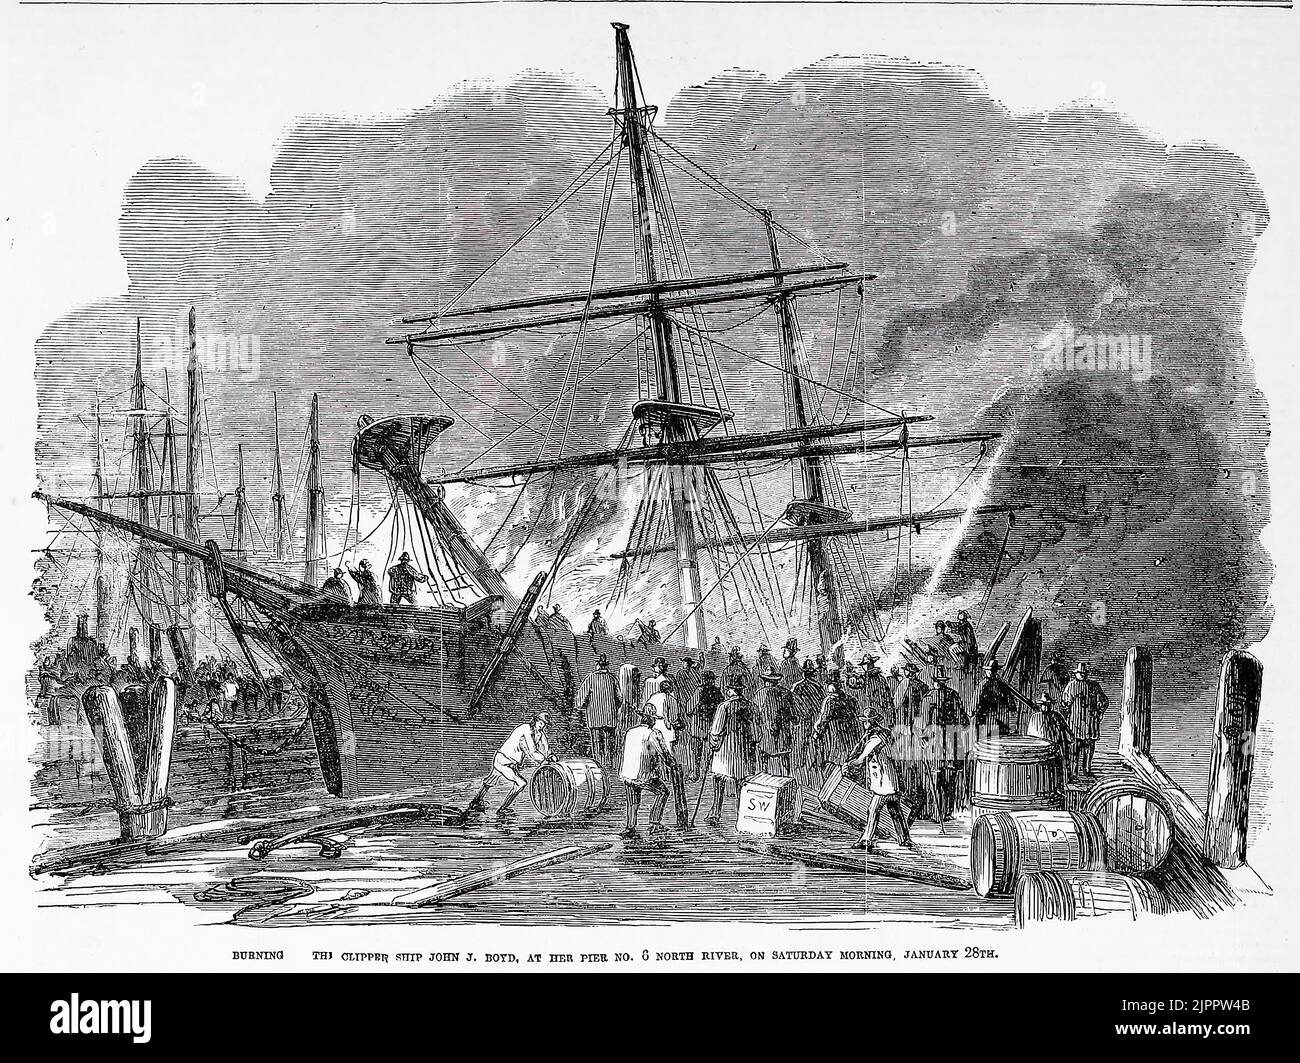 Burning of the clipper ship John J. Boyd, at her pier No. 6 North River (Hudson River), on Saturday morning, January 28th, 1860. 19th century illustration from Frank Leslie's Illustrated Newspaper Stock Photo